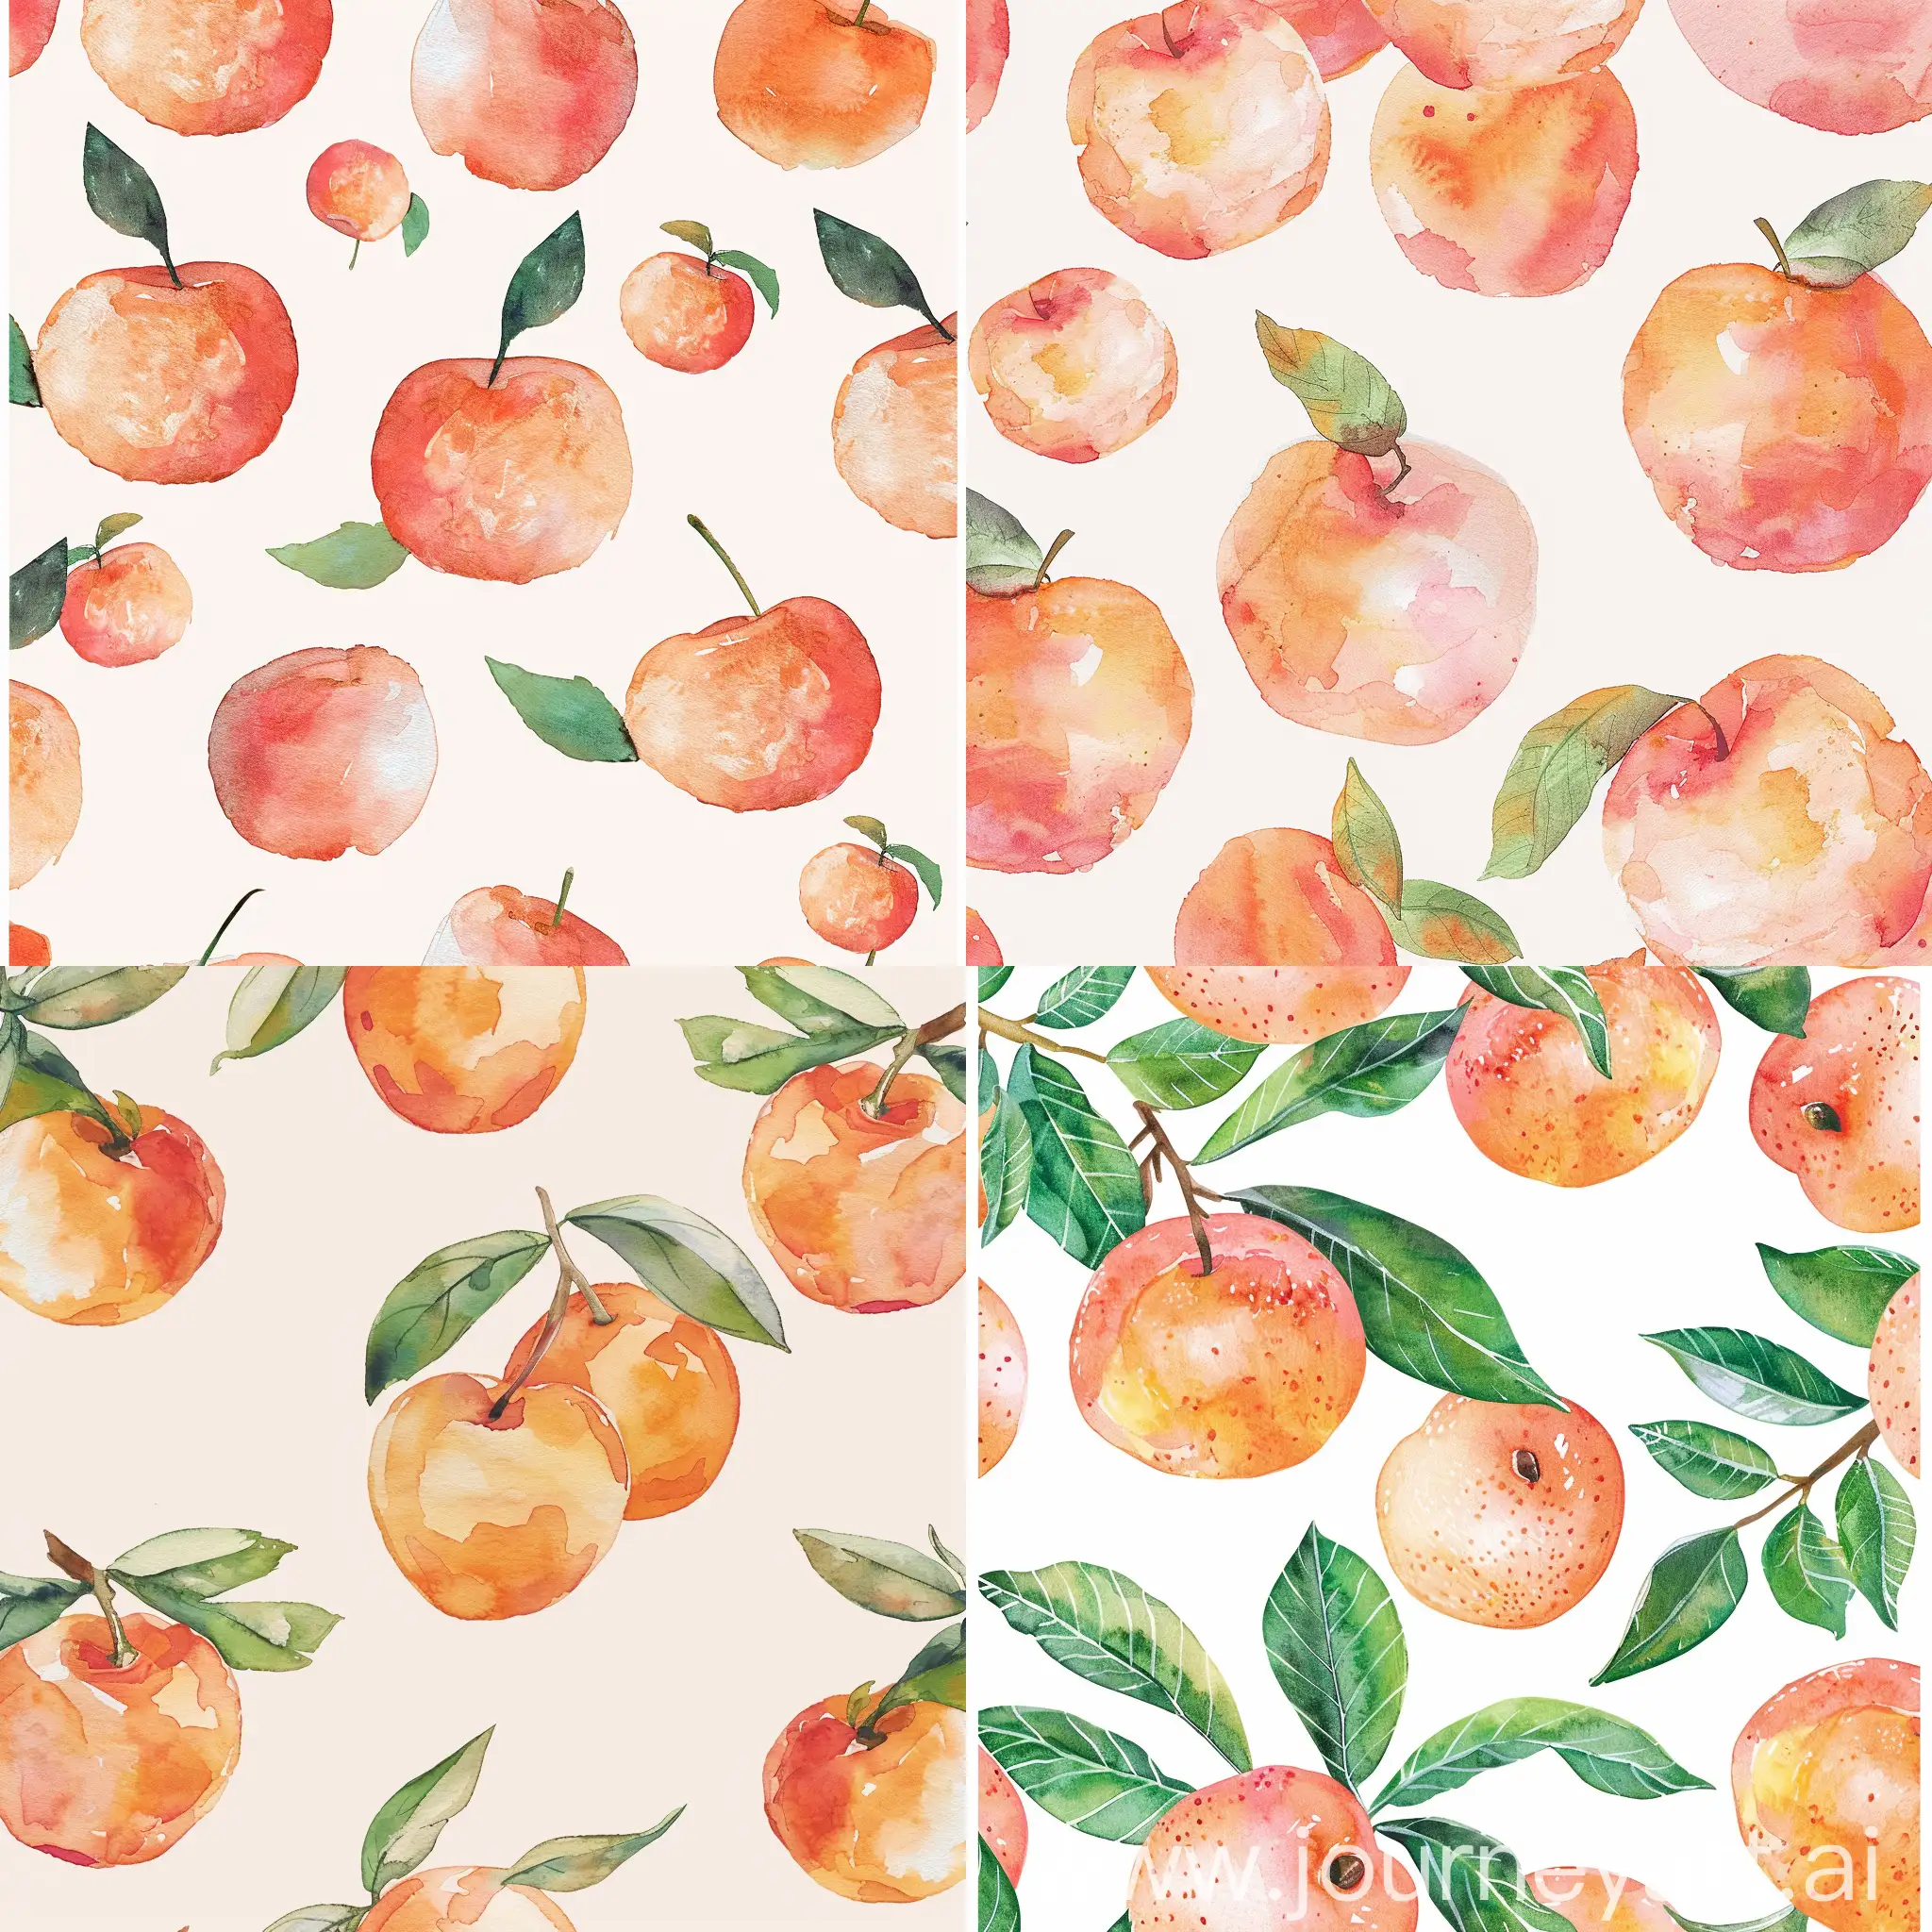 Vibrant-Peach-Watercolor-Pattern-with-HighQuality-Details